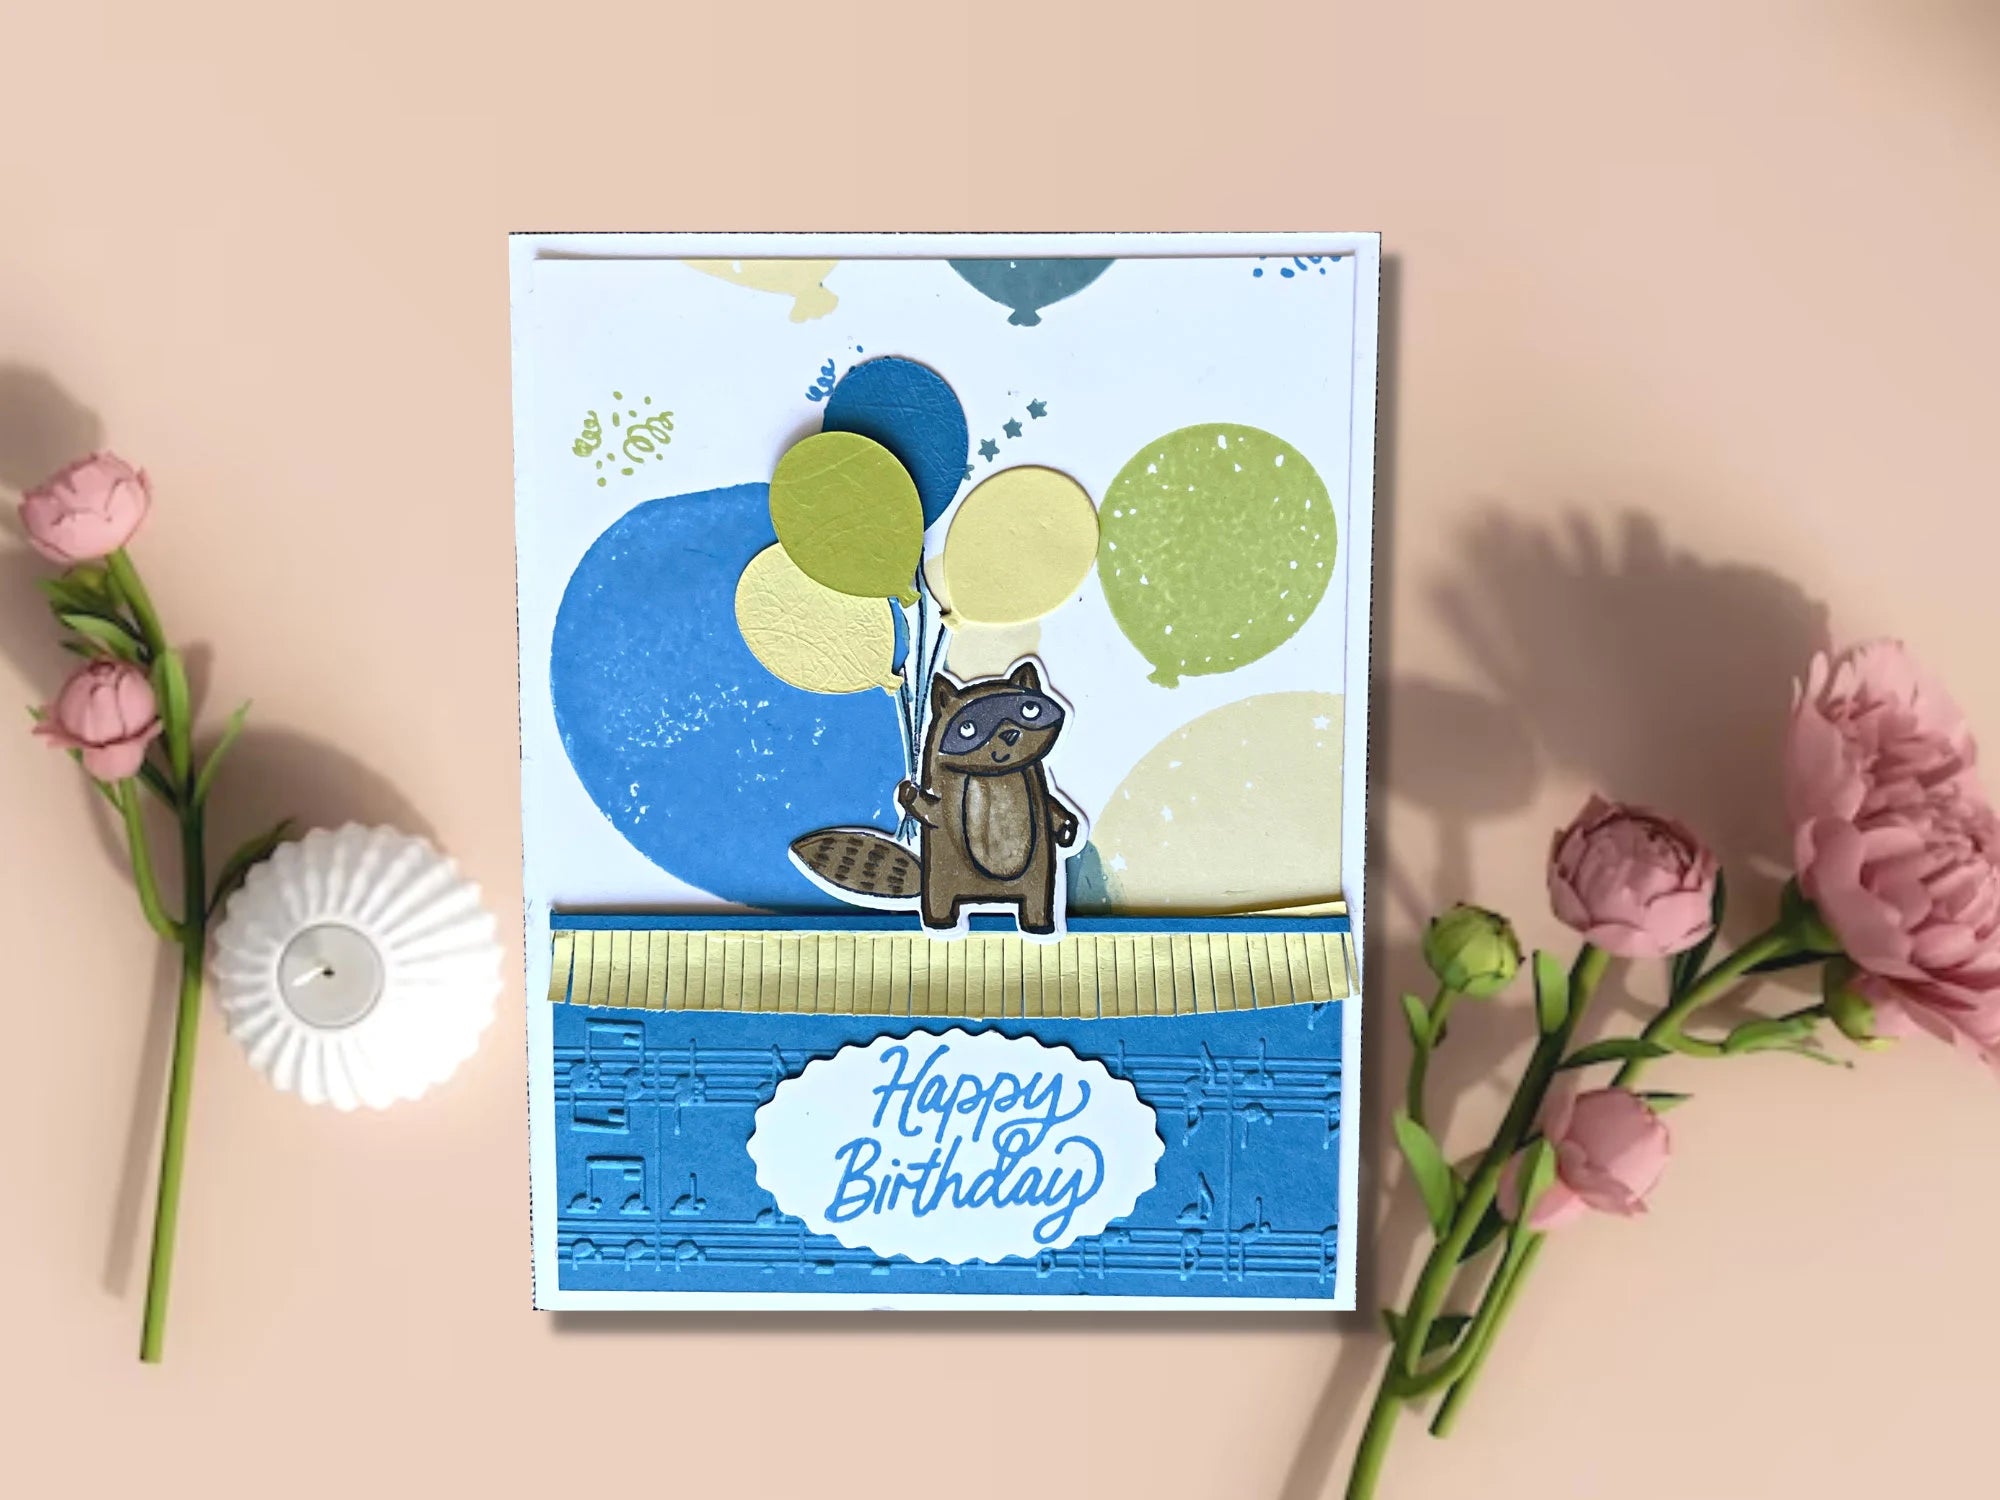 Balloon theme Birthday Card, Great card for child or anyone young at heart